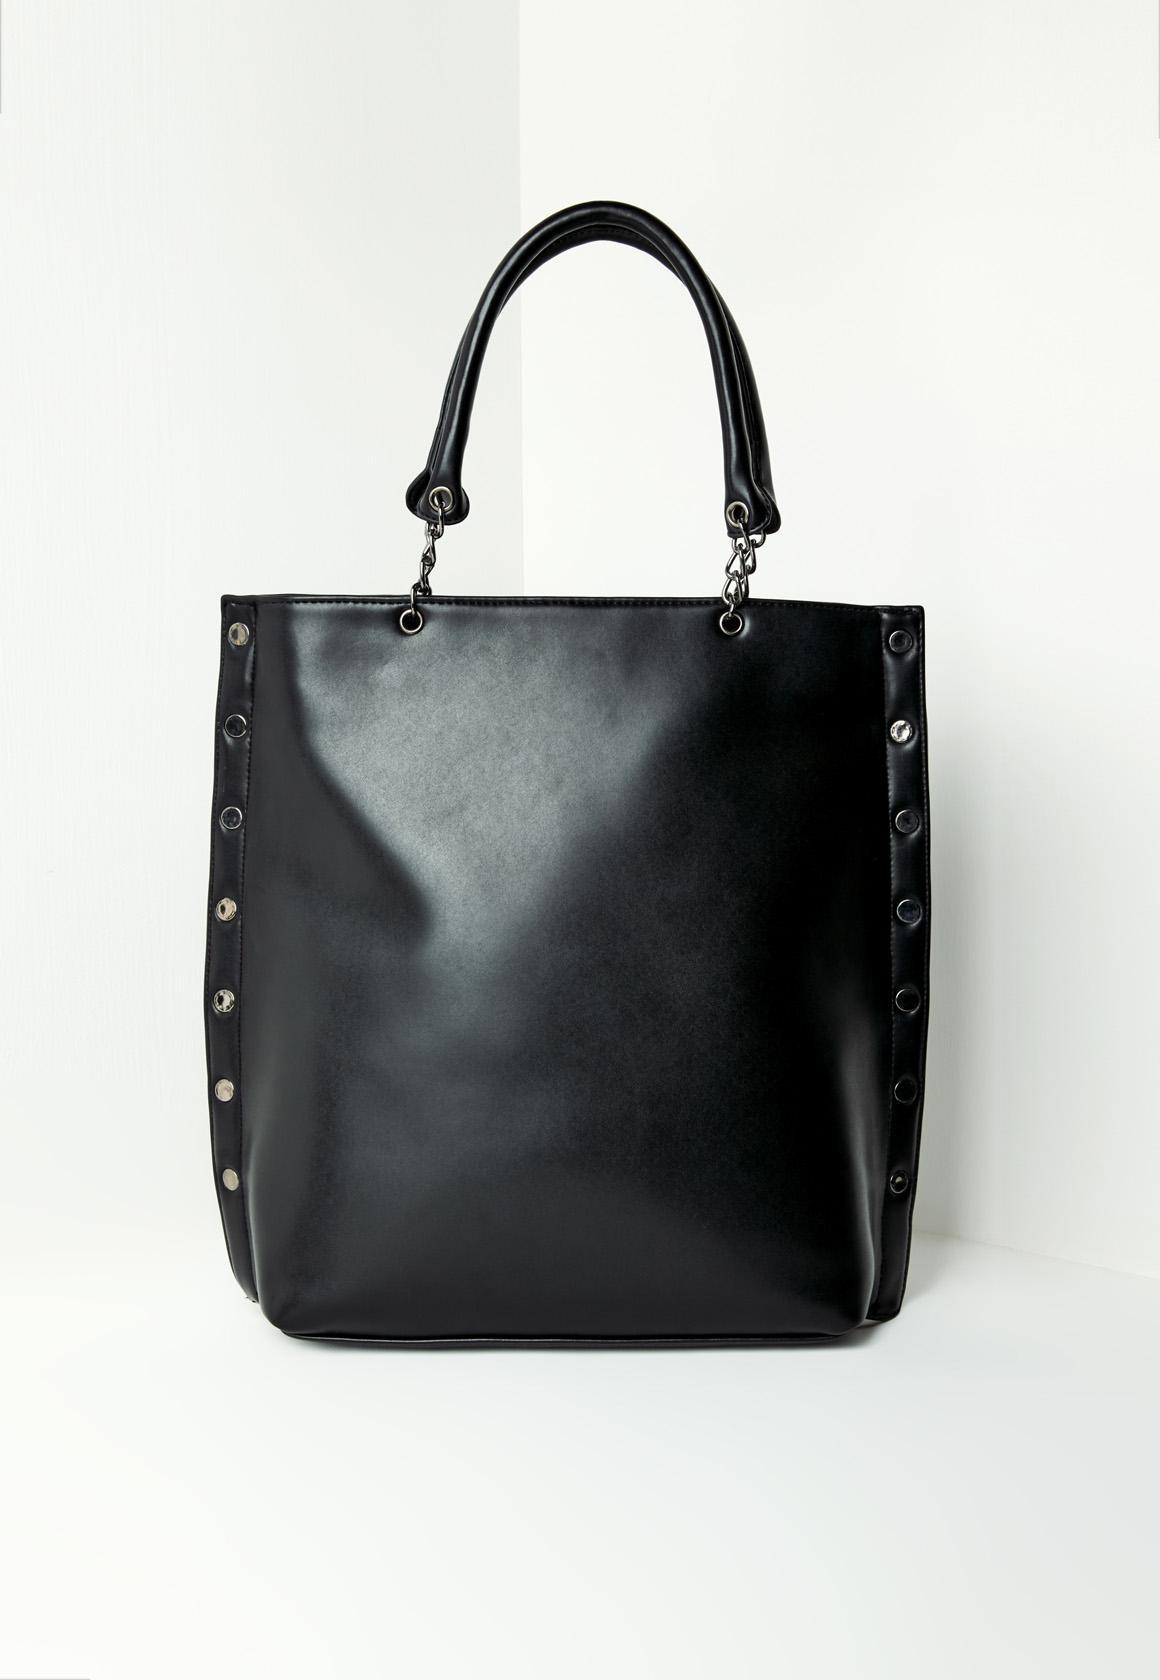 Lyst - Missguided Black Studded Edge Tote Bag in Black